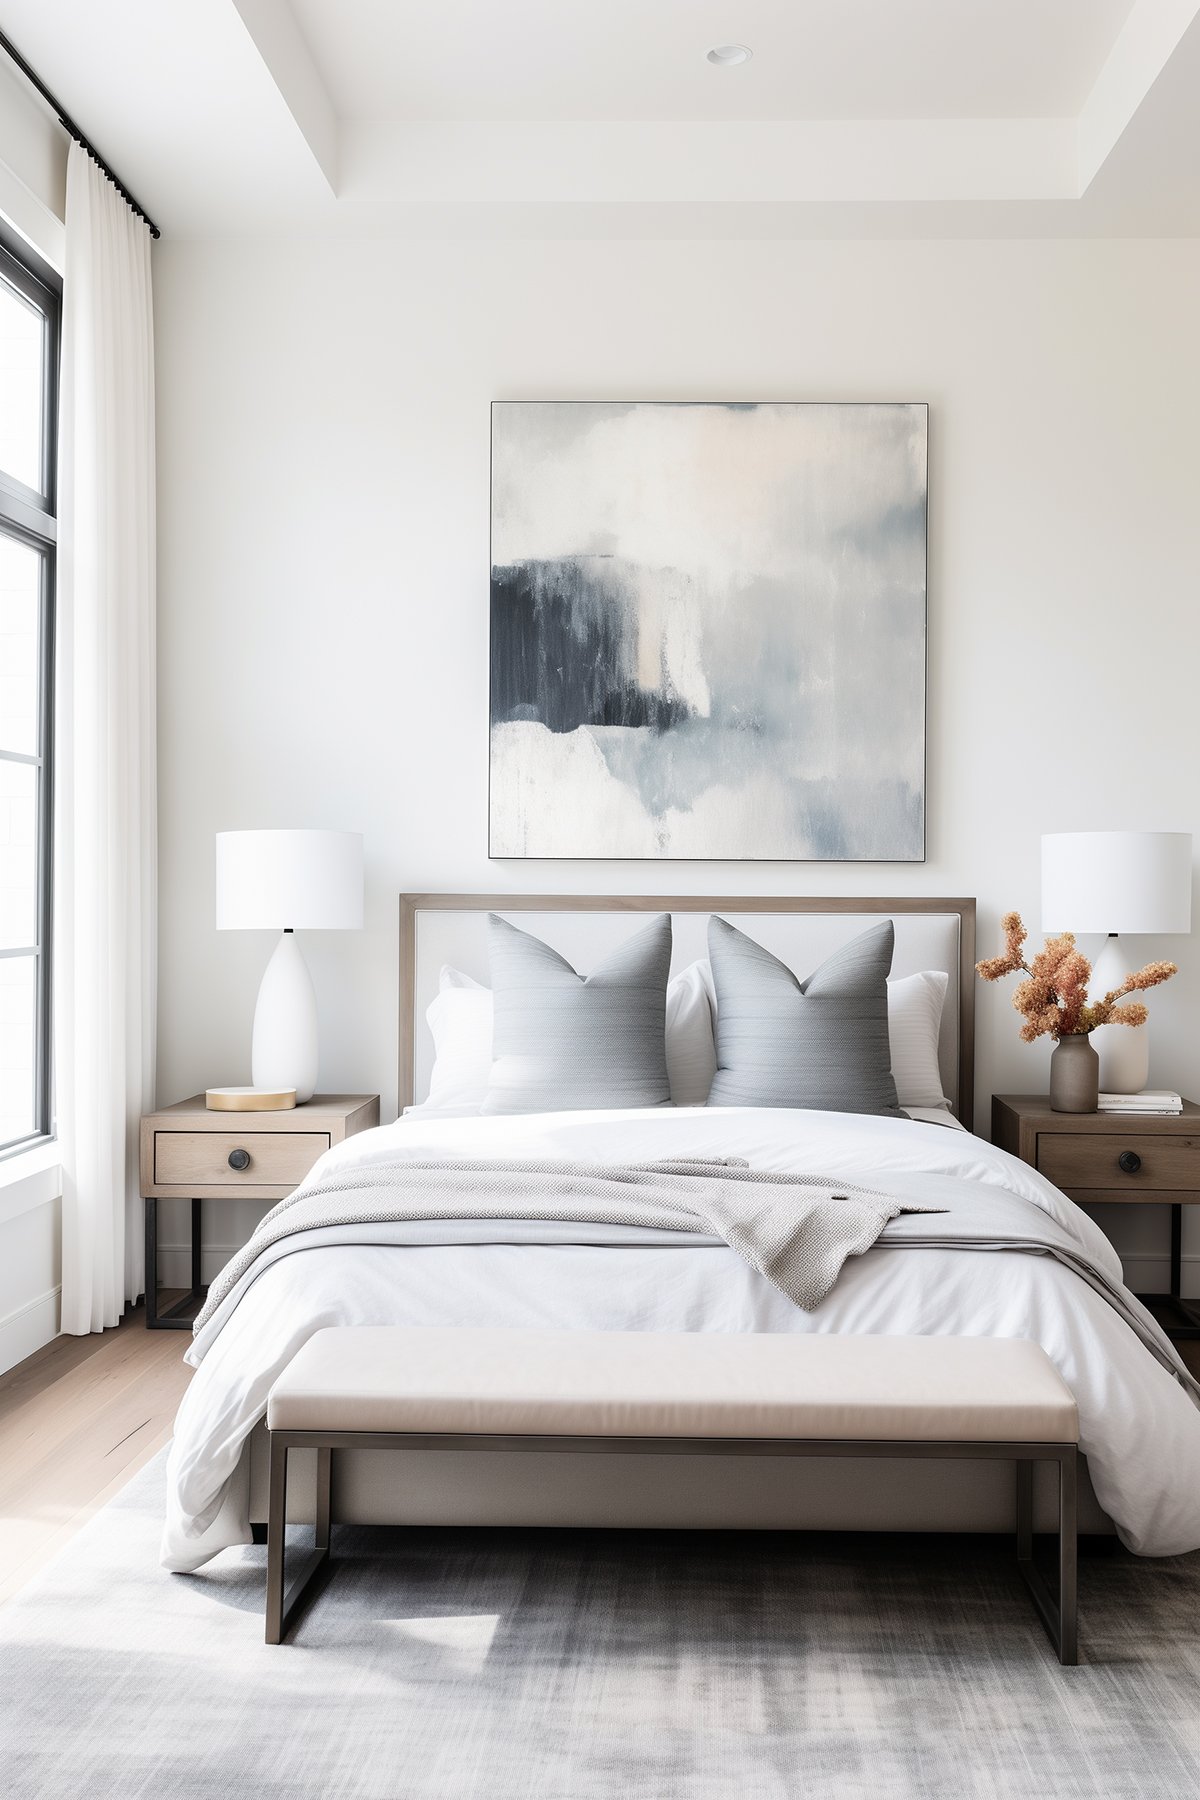 A bedroom painted with Sherwin Williams City Loft featuring a bed with gray bedding, white lamps on nightstands, and a large abstract wall art piece.